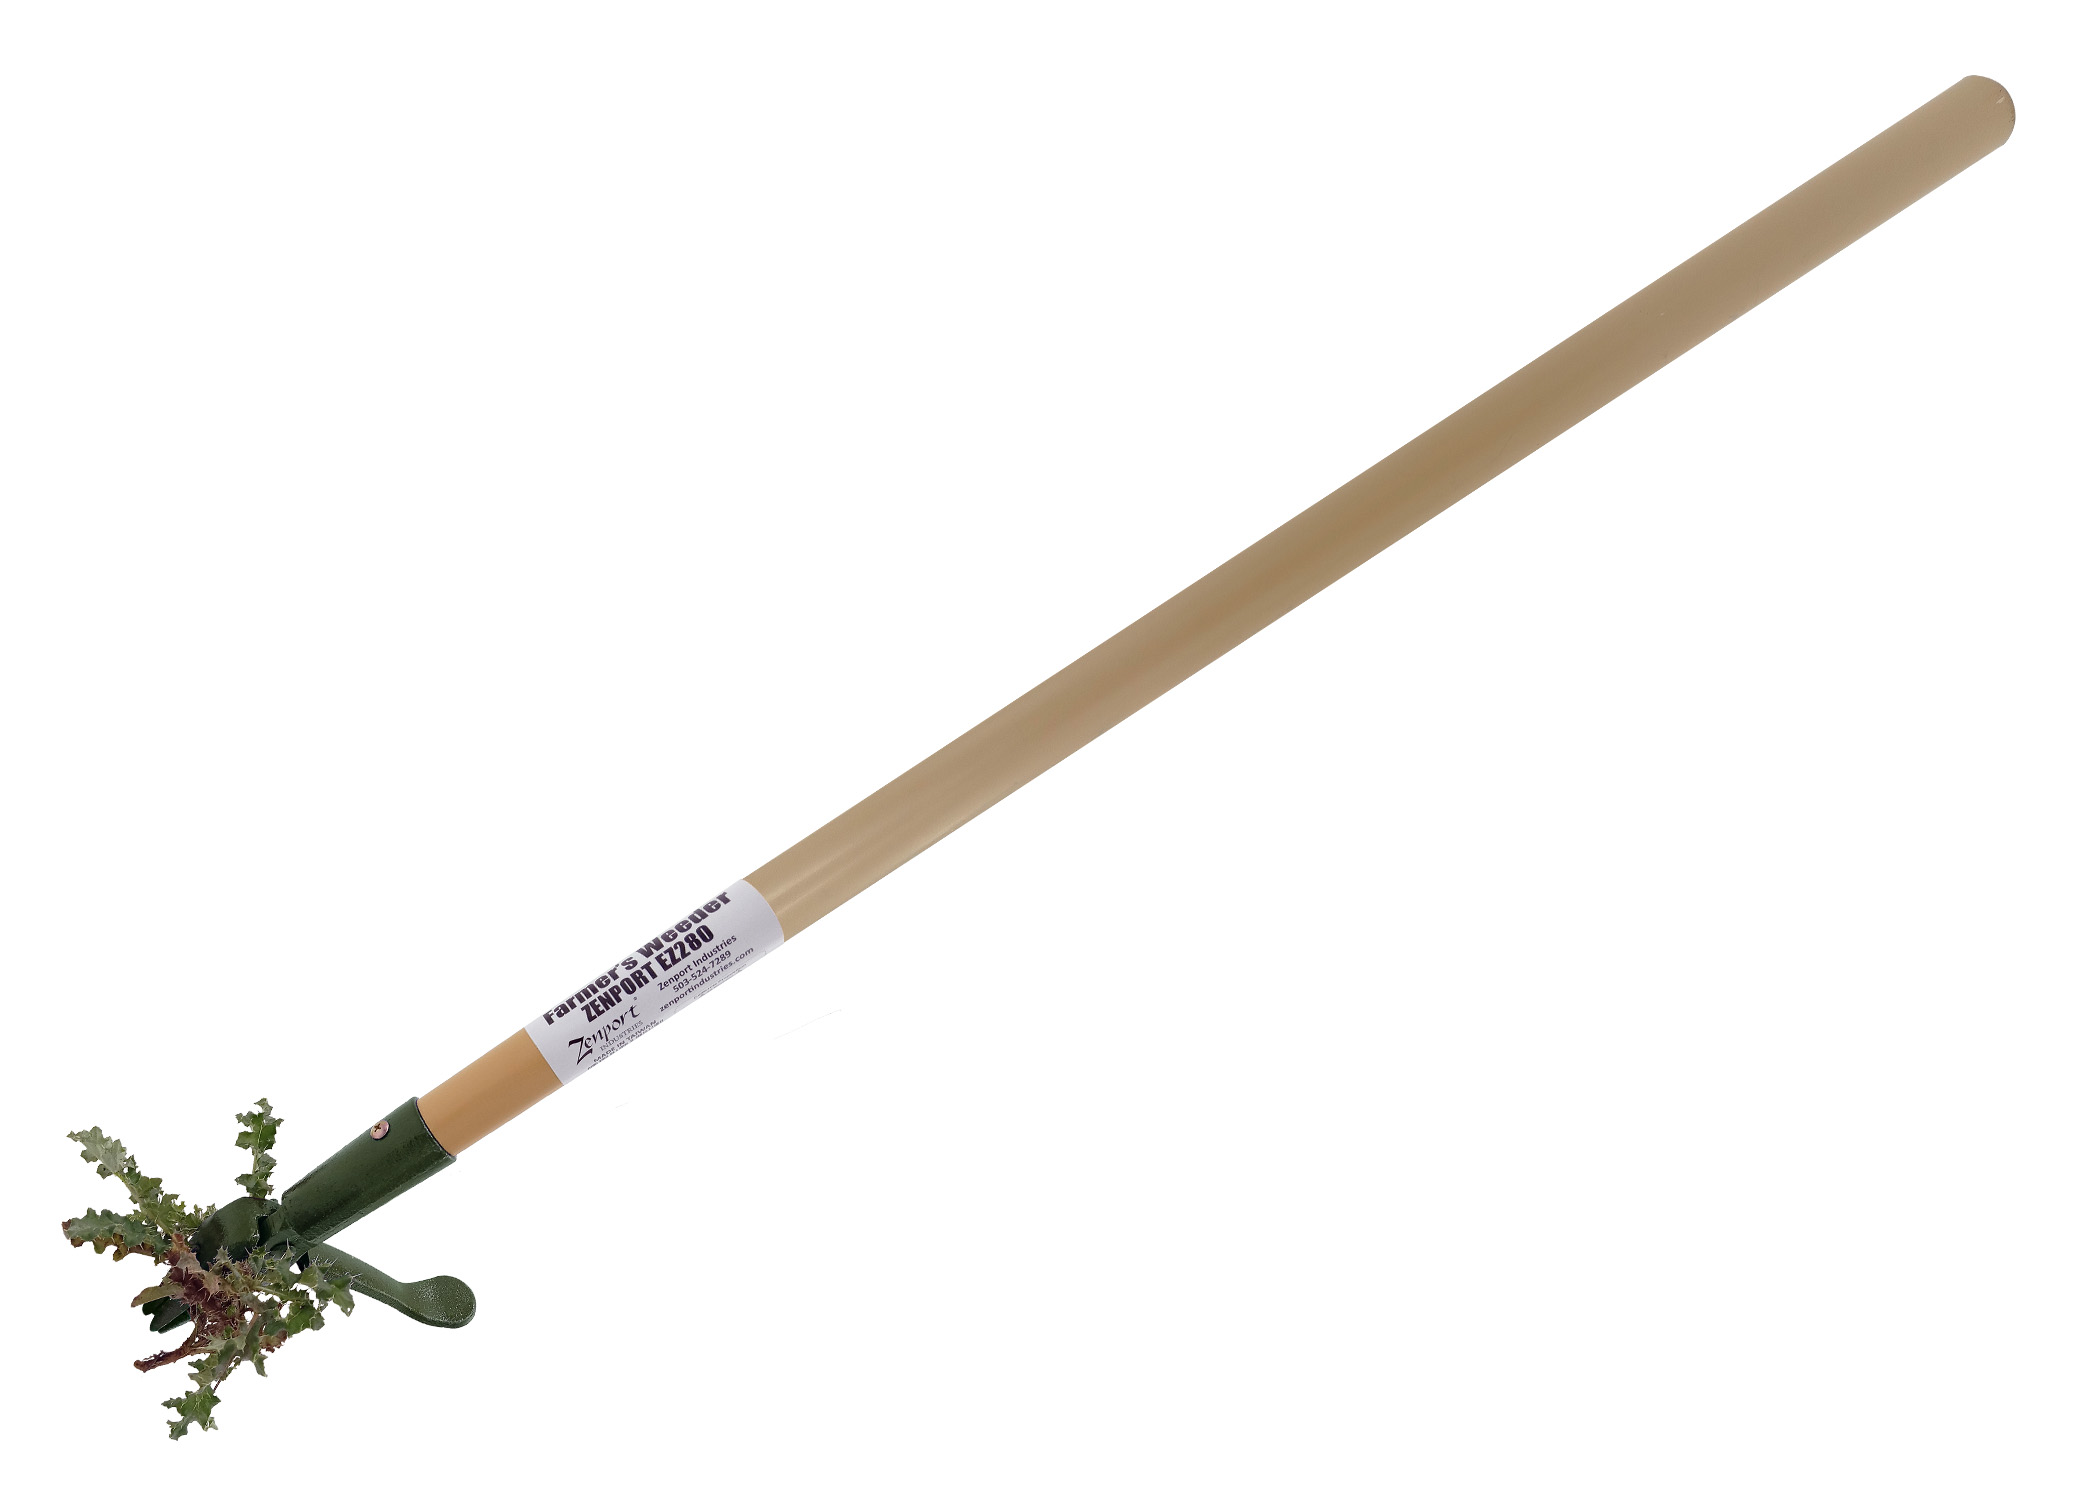 Zenport Farmers Weeder EZ280 - 48-Inch Wood Handle Stand-Up Weeding Tool for Effortless Weed Removal and Garden Maintenance